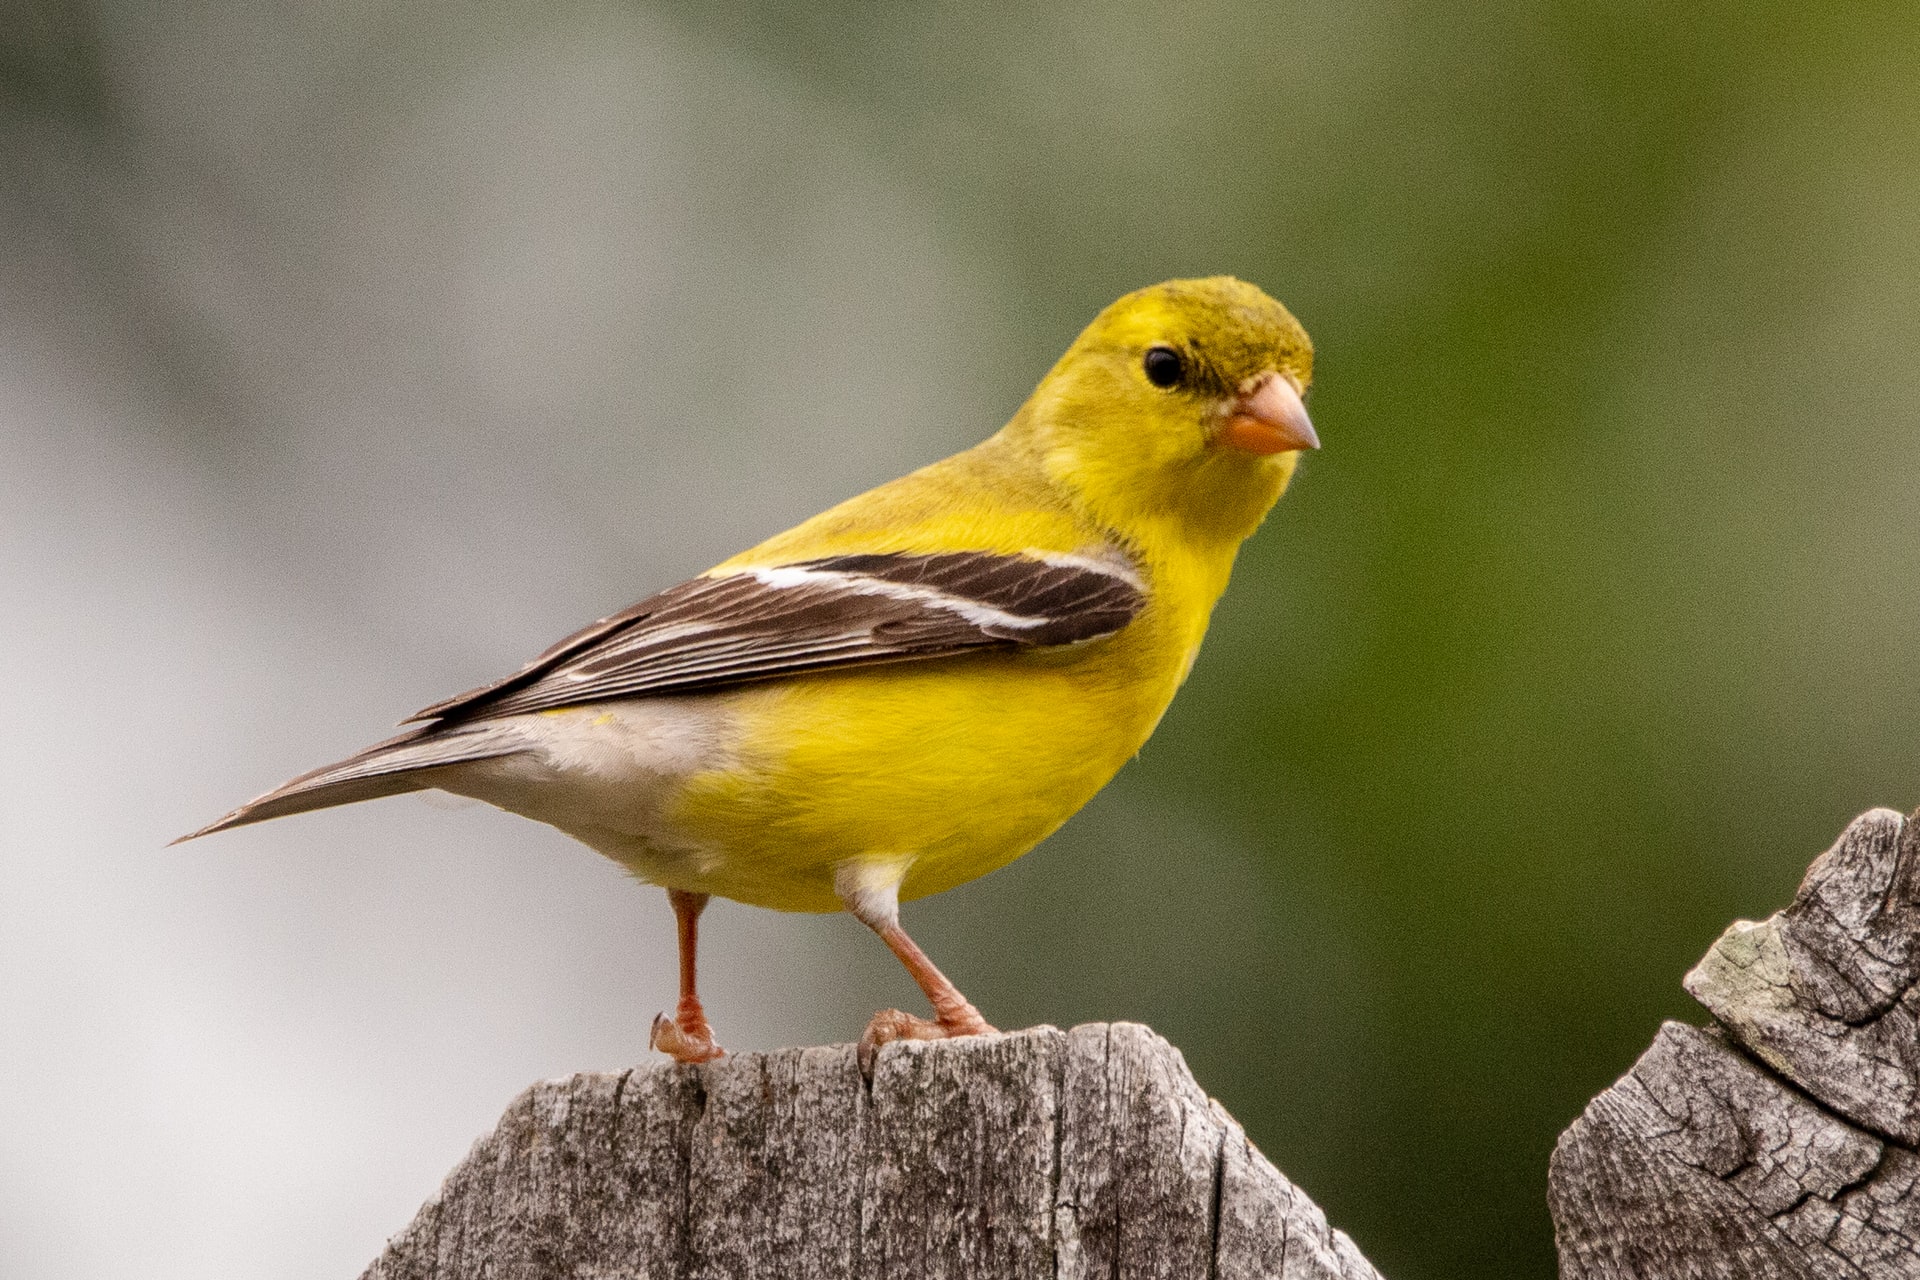 A canary bird perched on a fence.